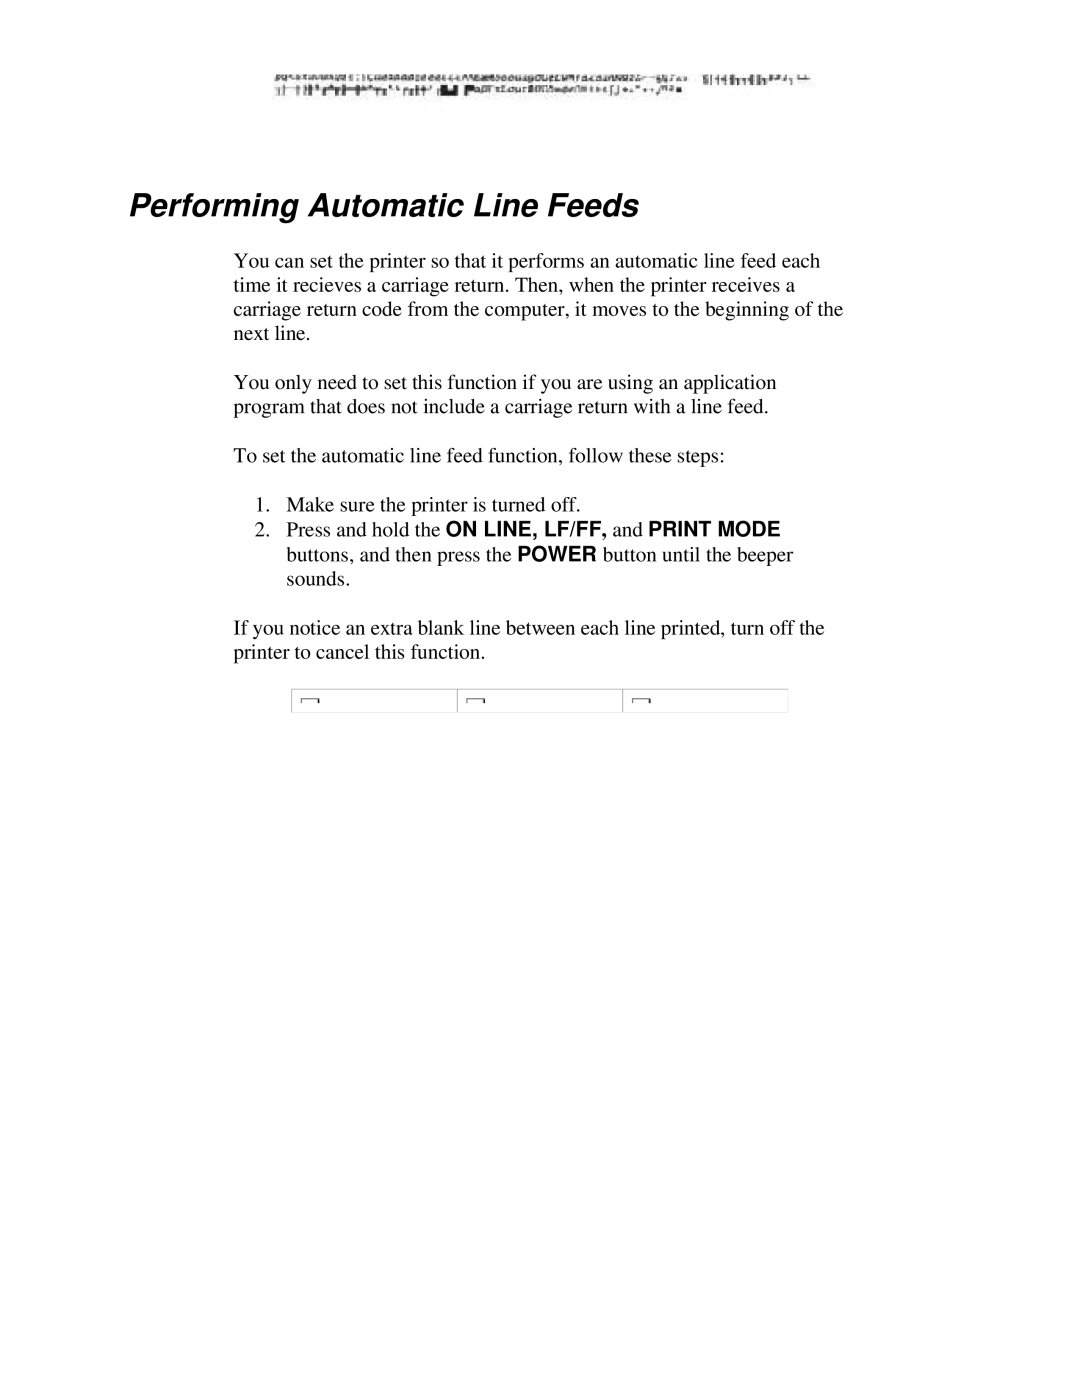 Canon BJ-230 user manual Performing Automatic Line Feeds 